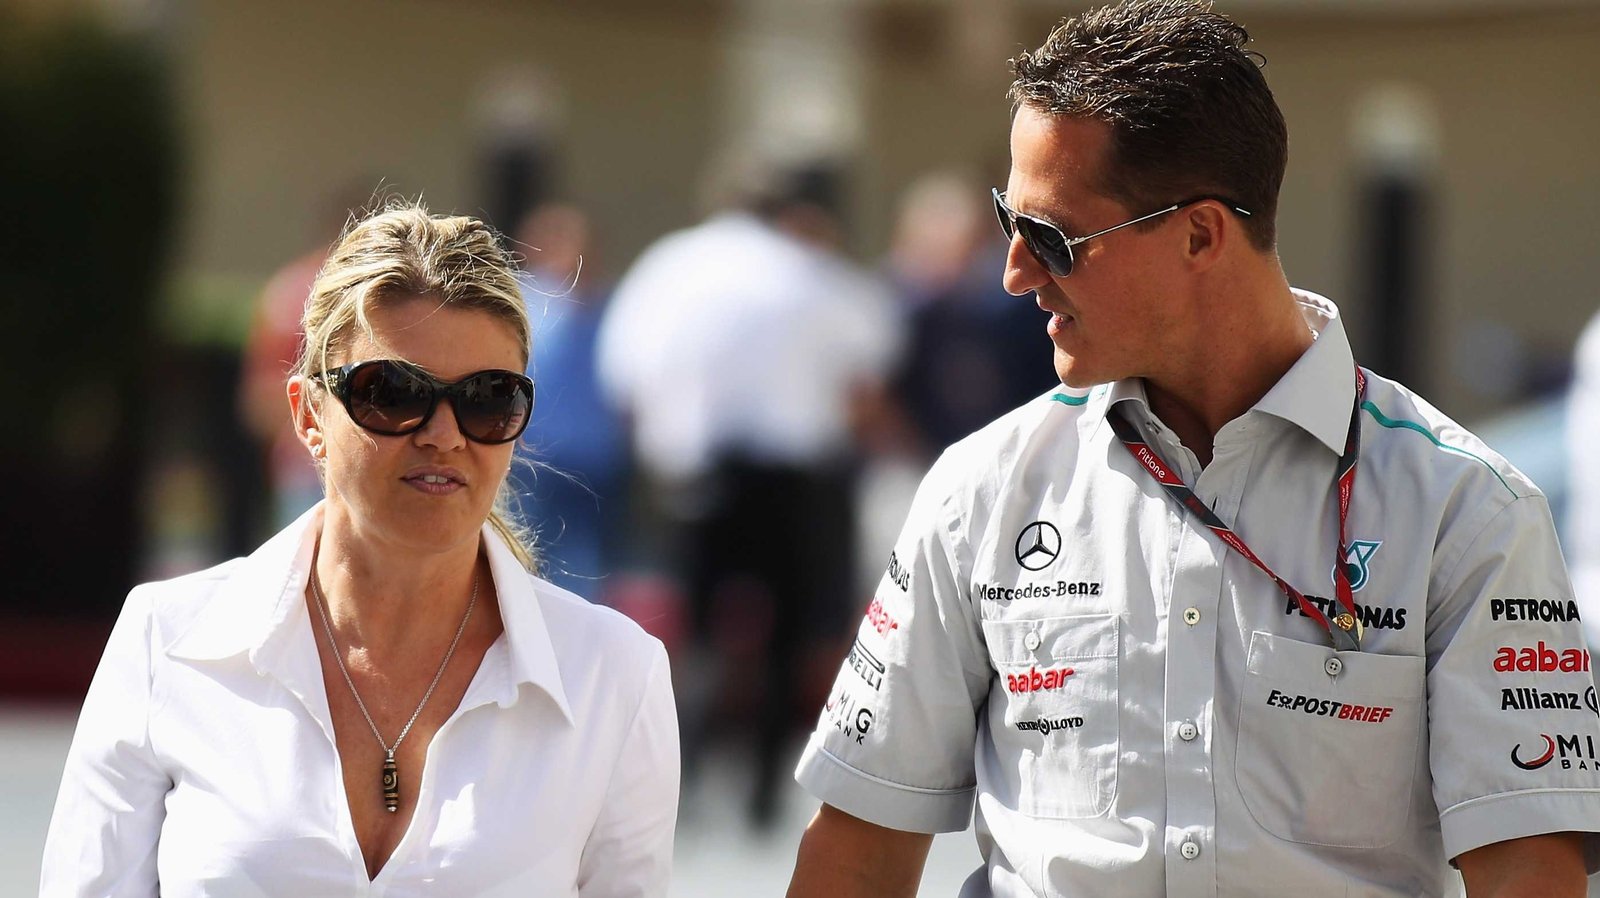 Schumacher family right to conceal condition - Brawn